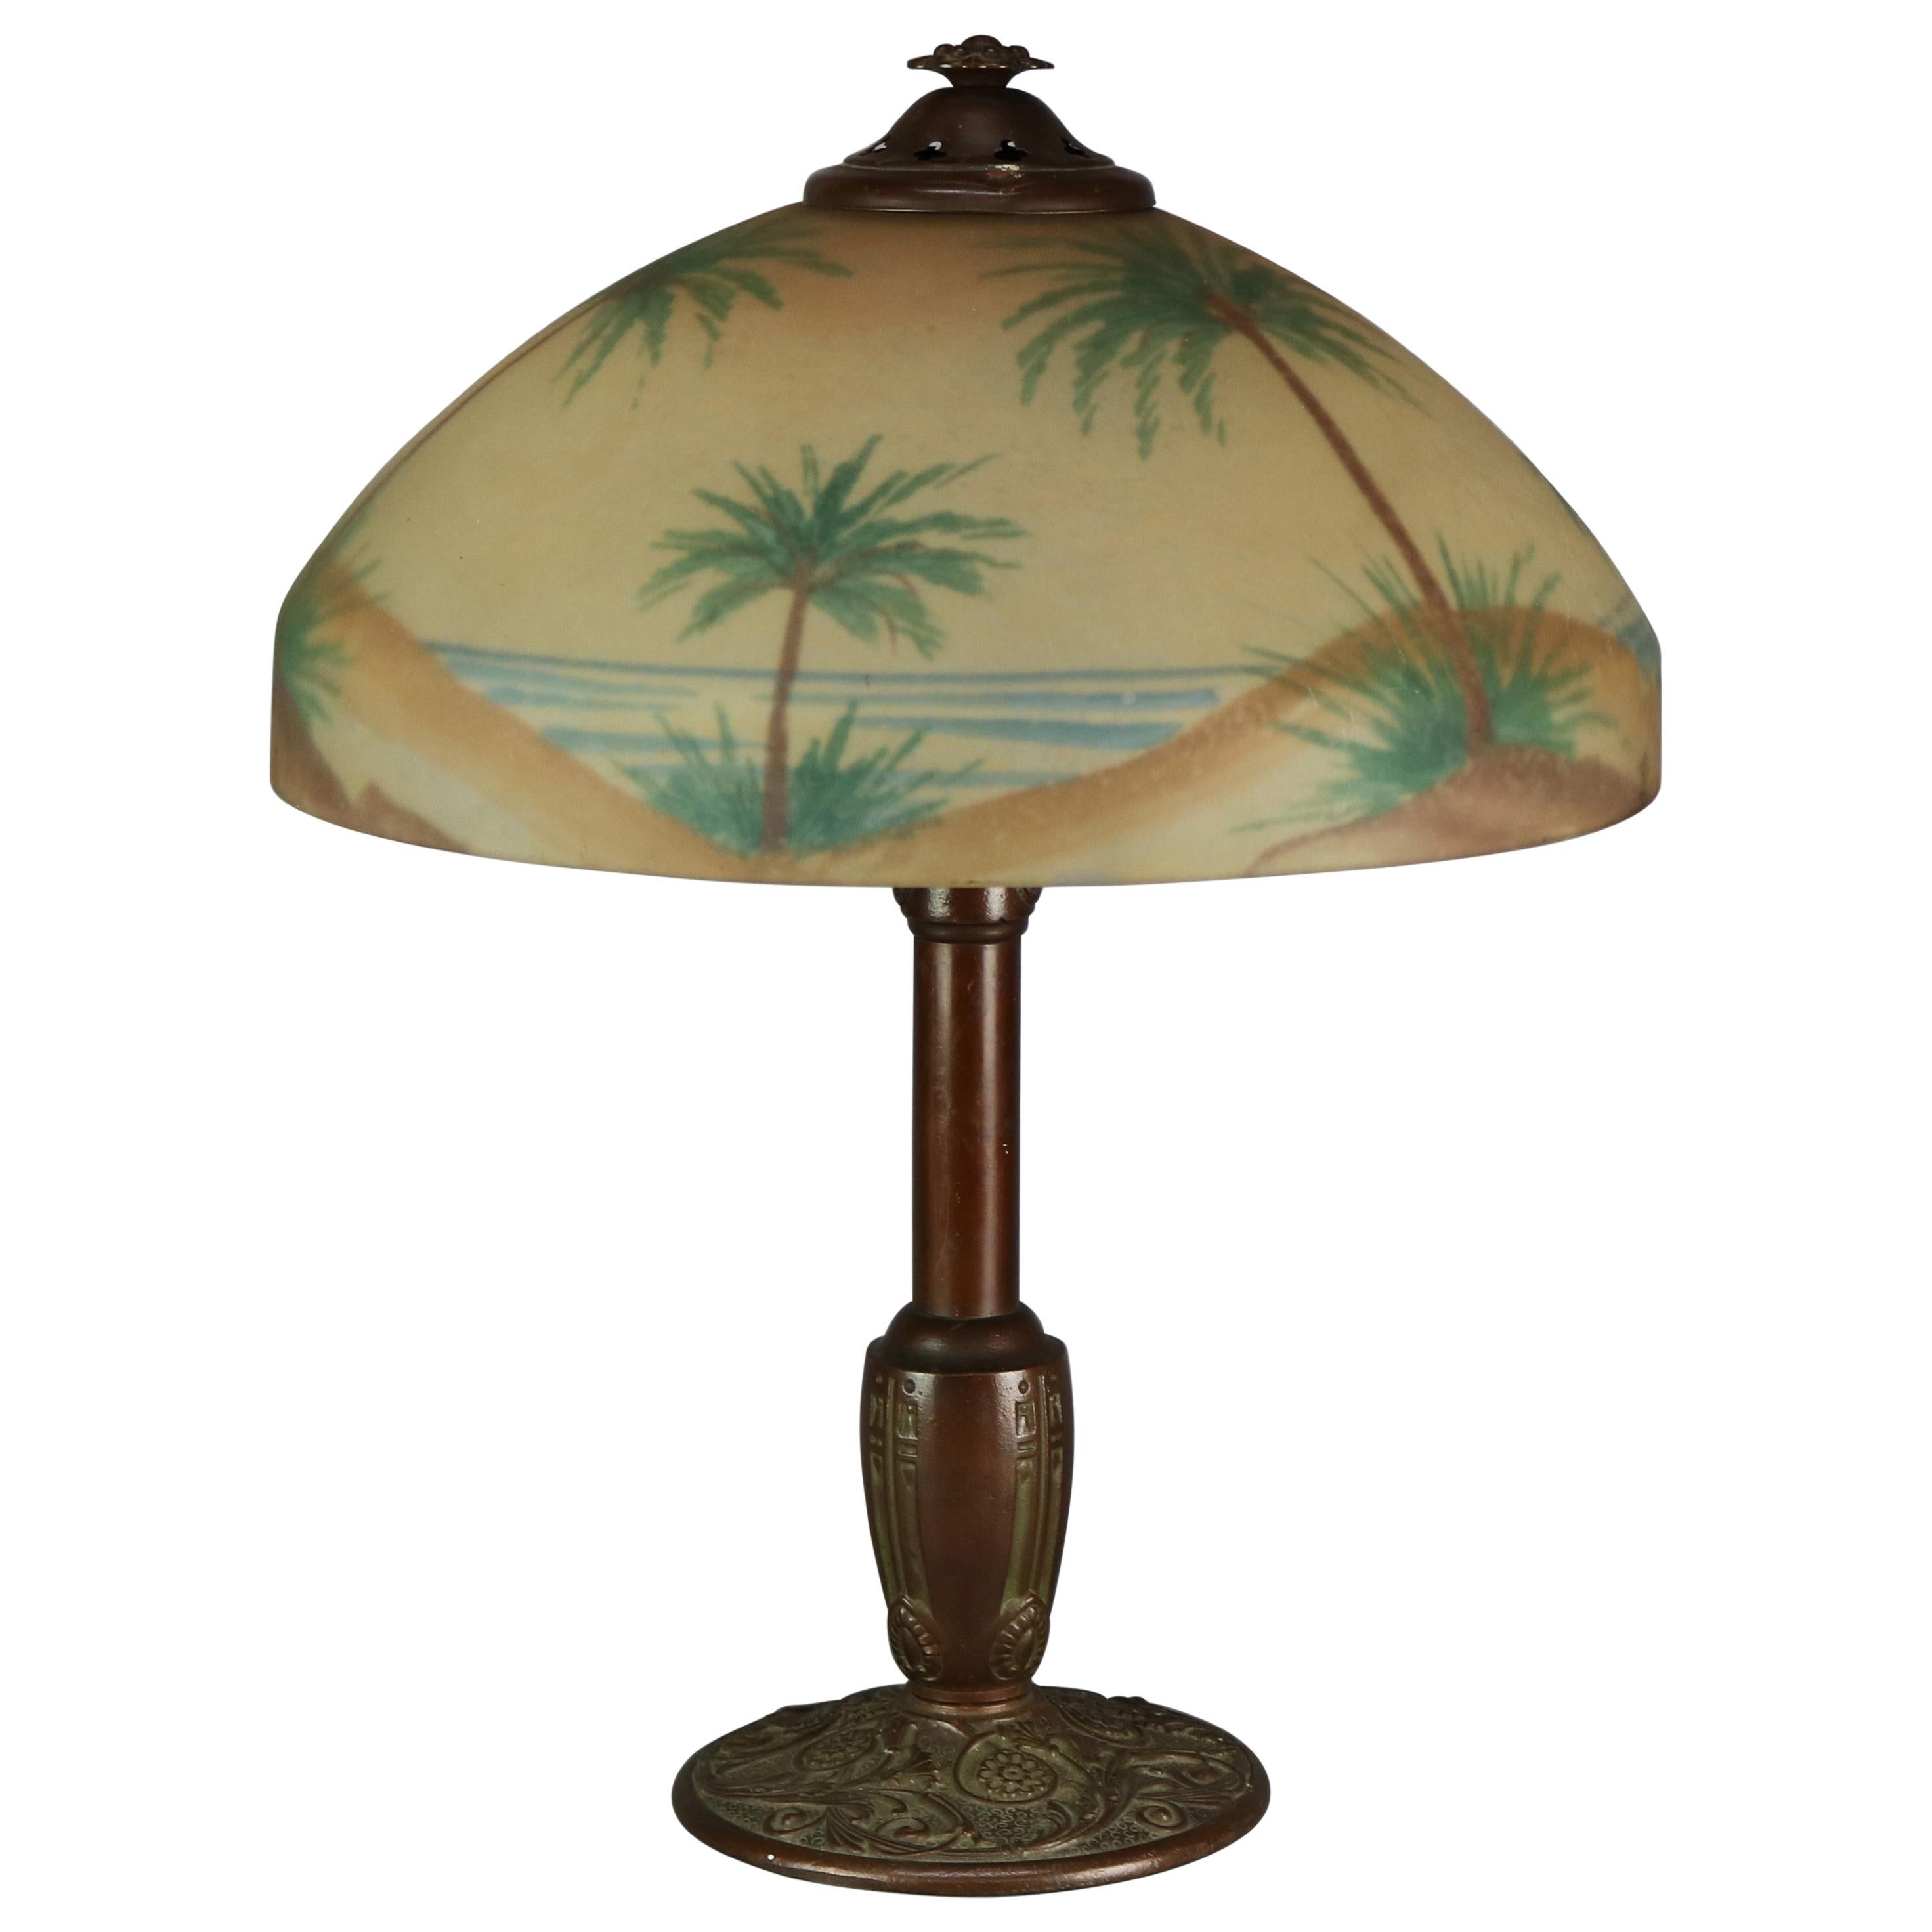 Pittsburgh Reverse Painted Arts & Crafts Beach Sunset with Palms Table Lamp 1920